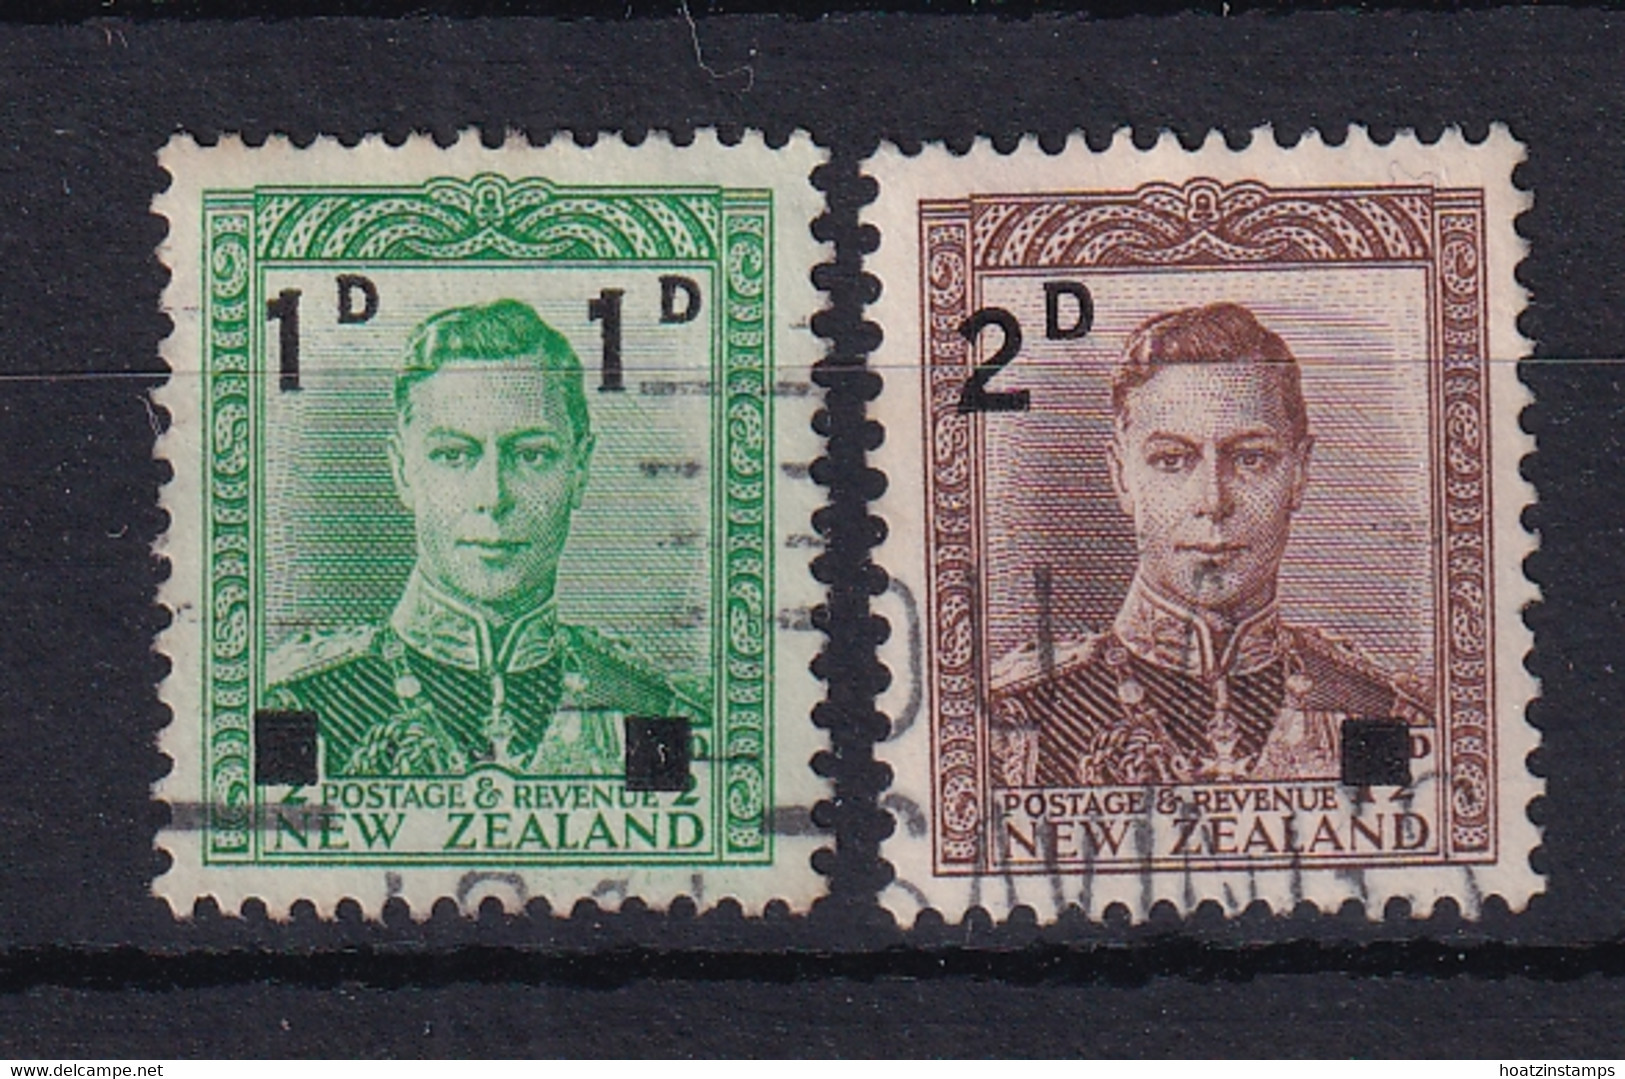 New Zealand: 1941   KGVI - Surcharge OVPT      Used - Used Stamps